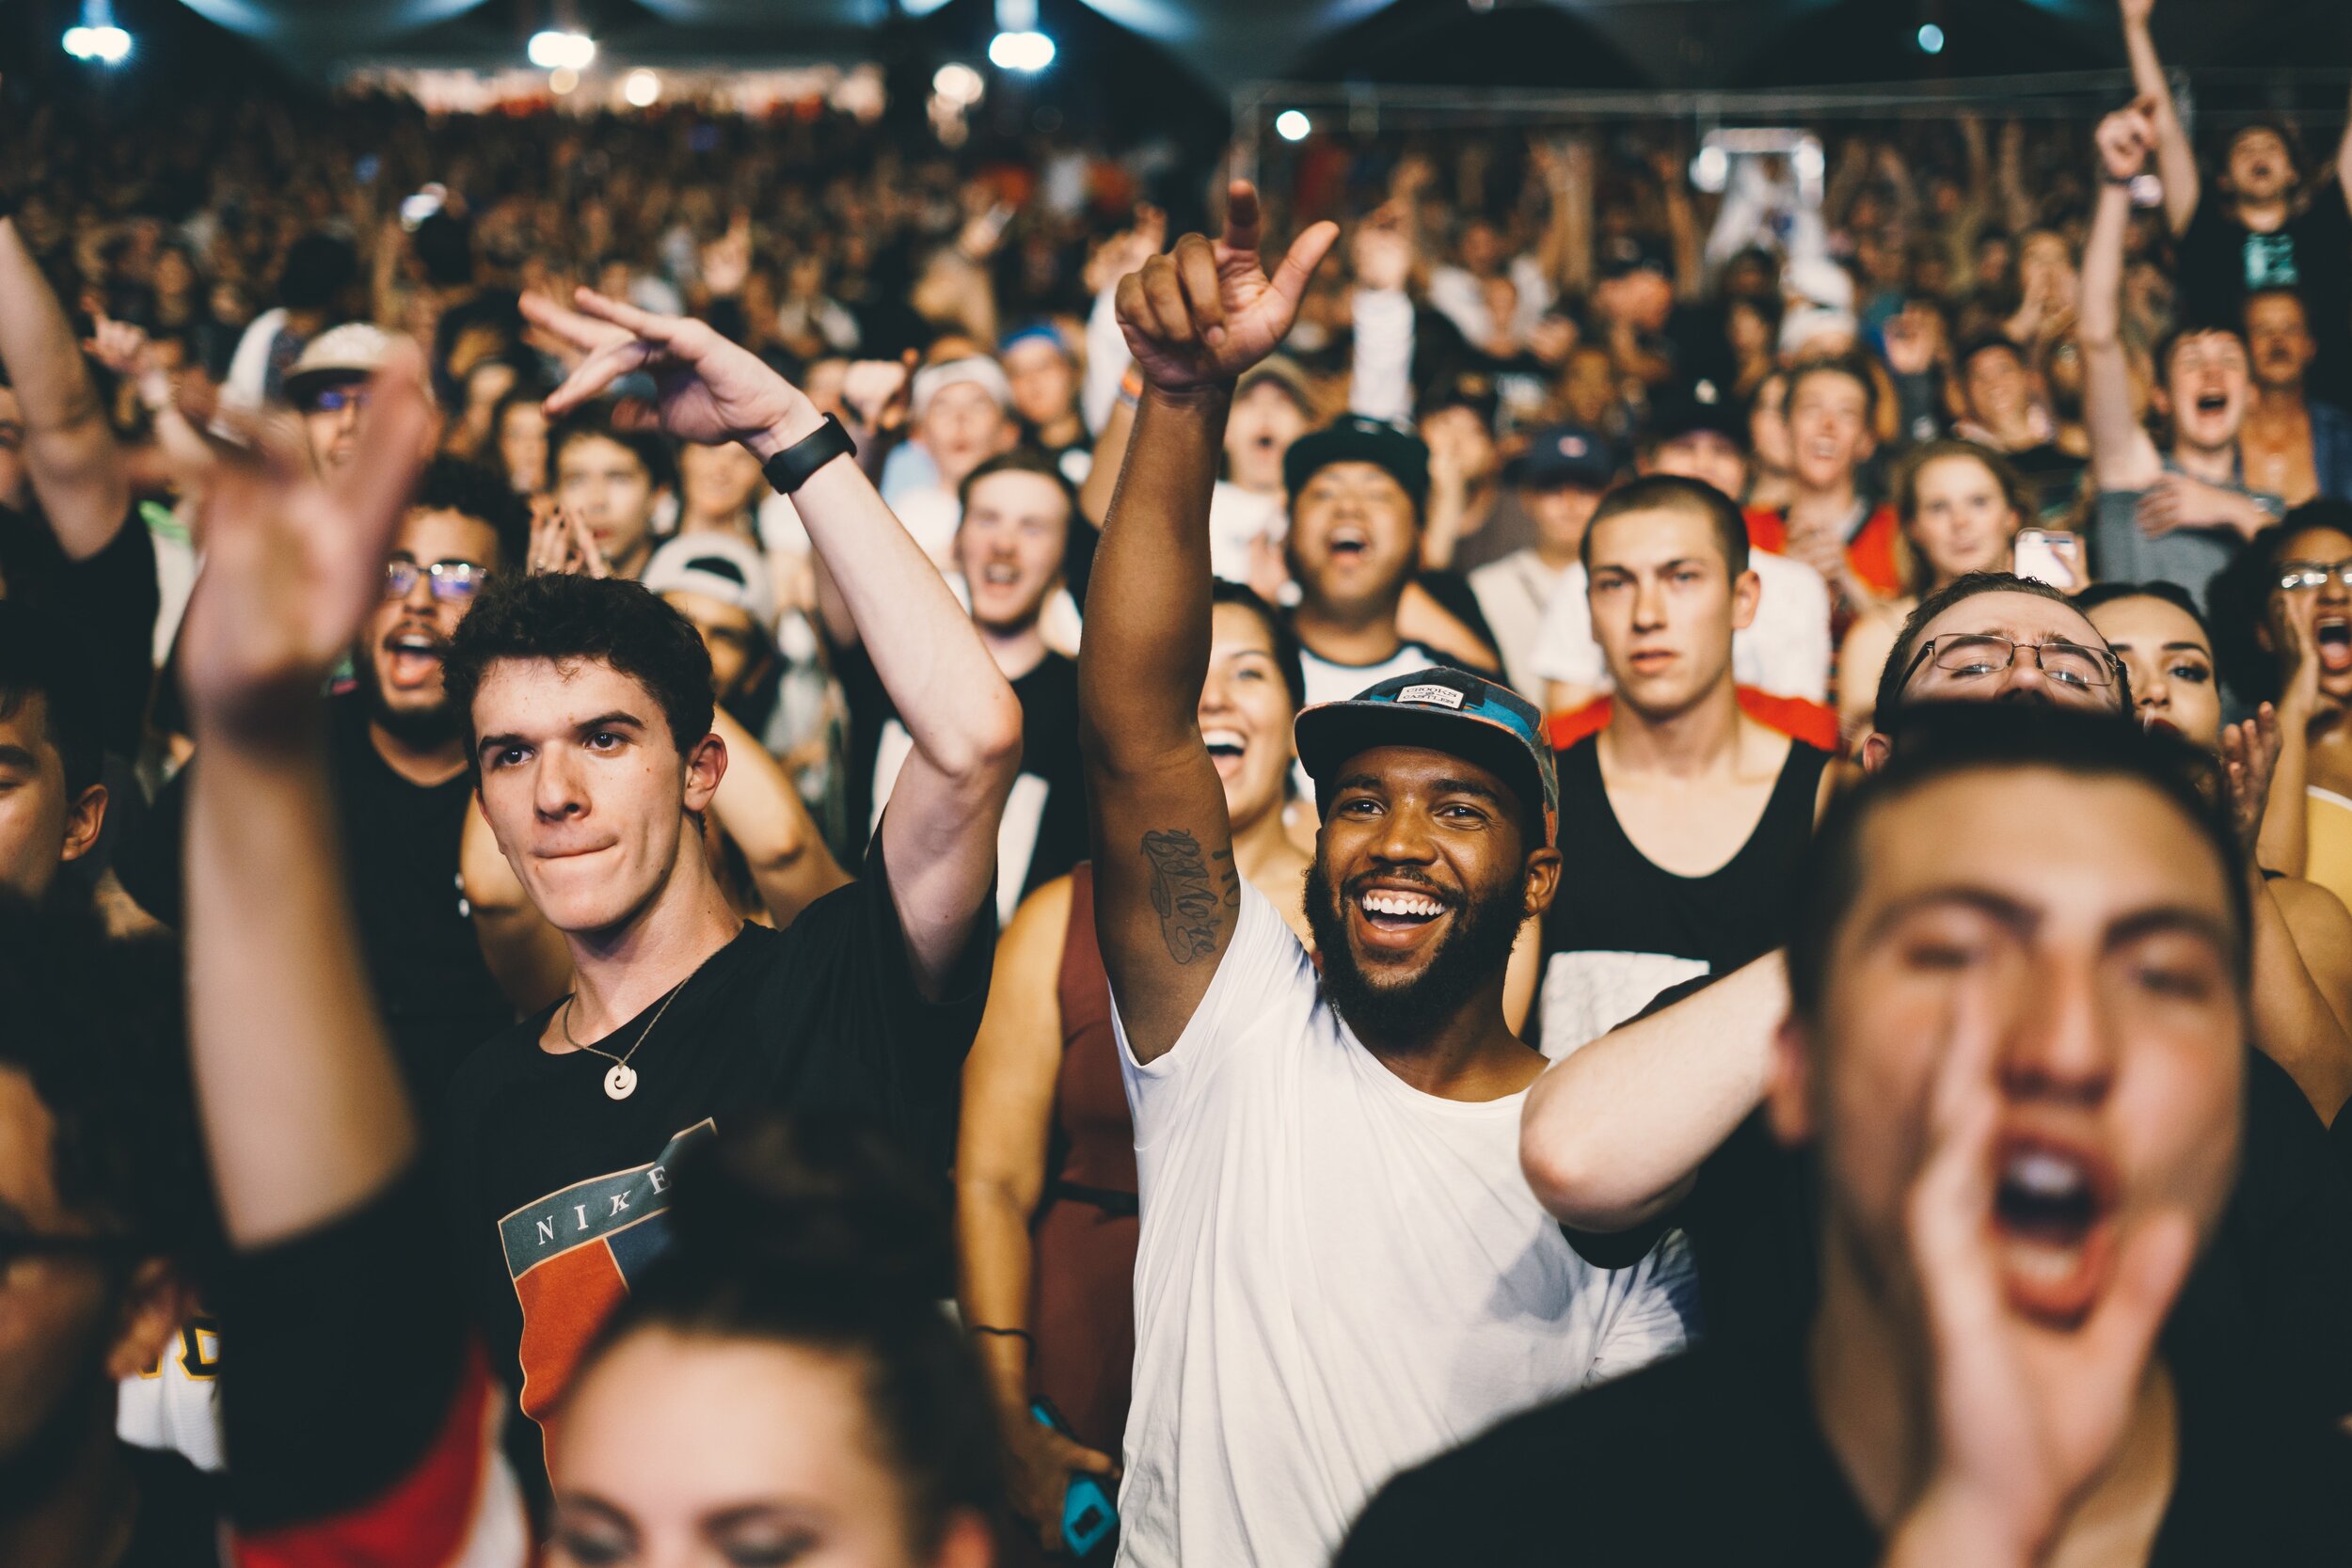 How to identify a target audience for your event